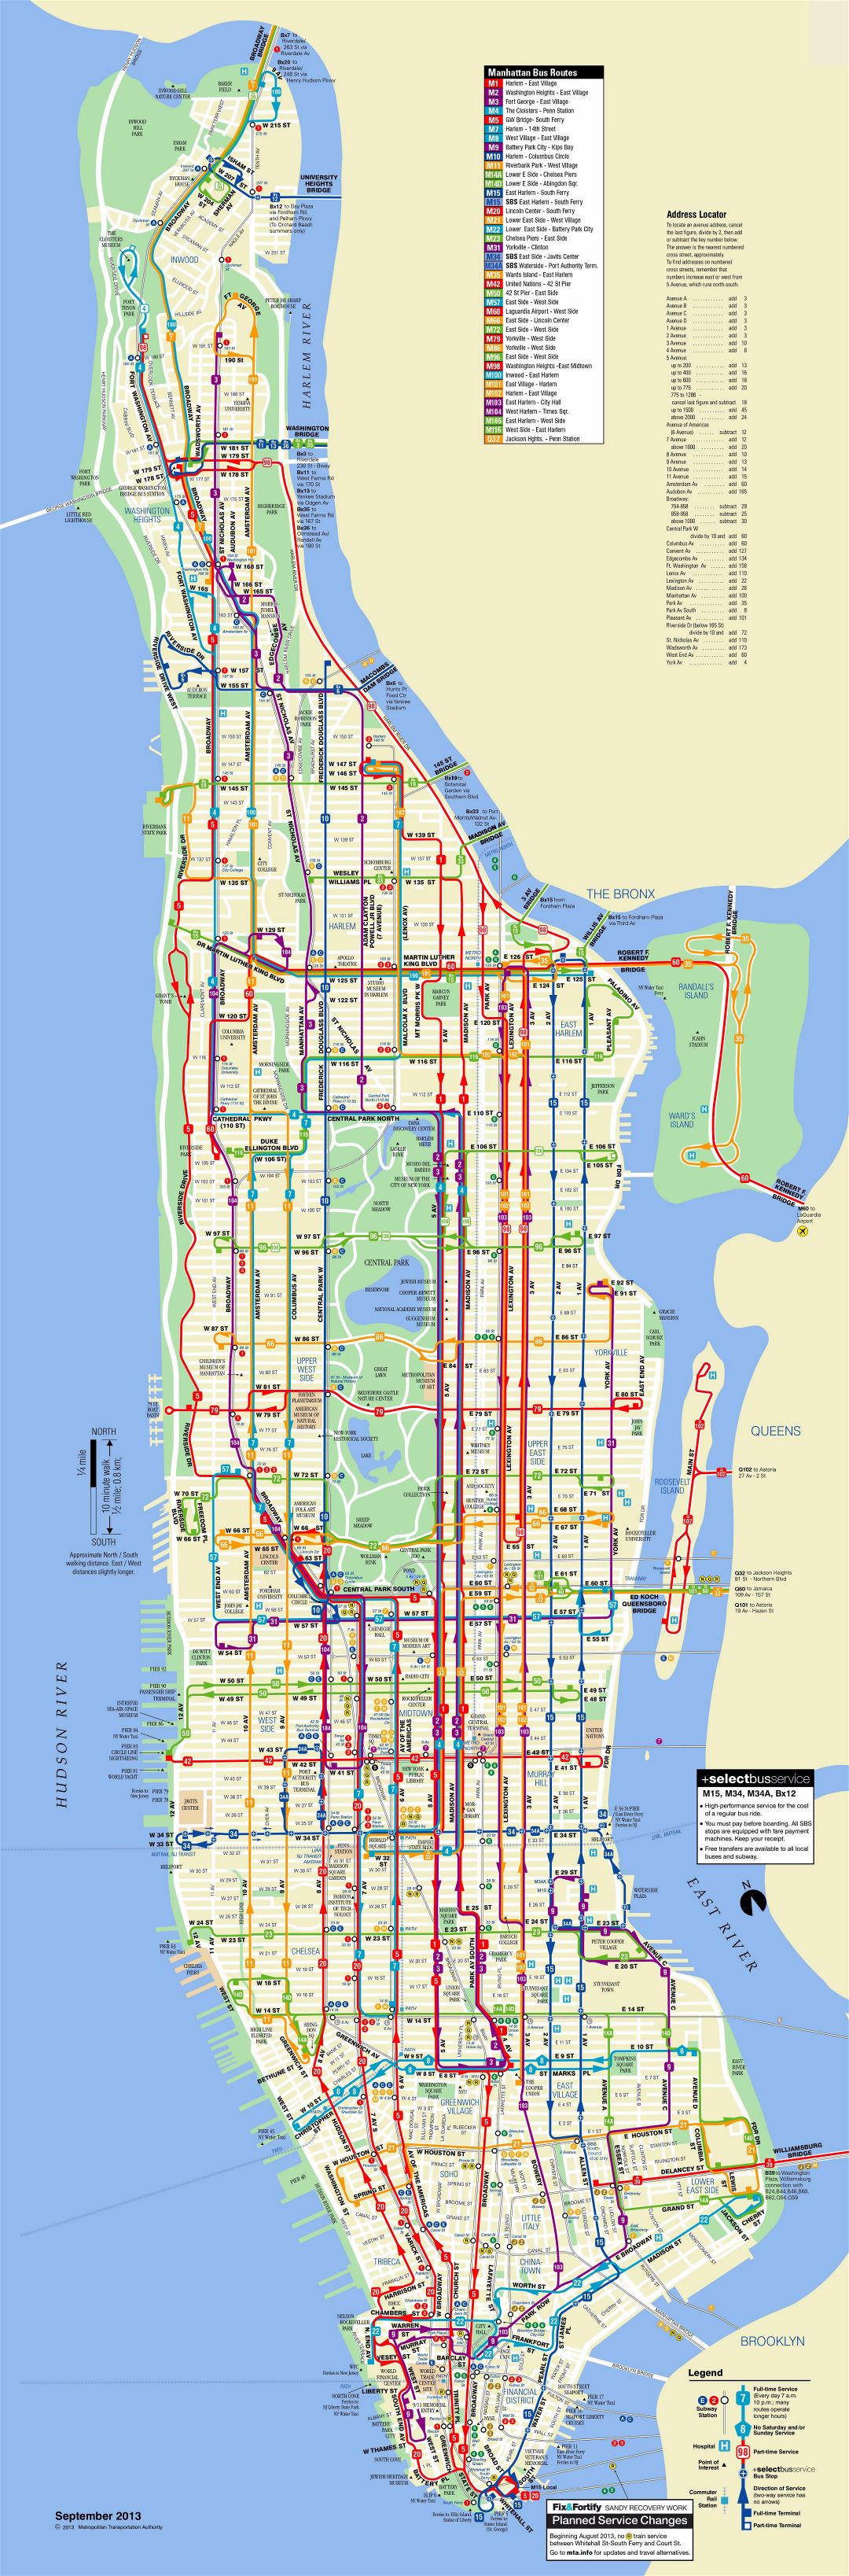 Large scale detailed bus routes map of Manhattan, NYC